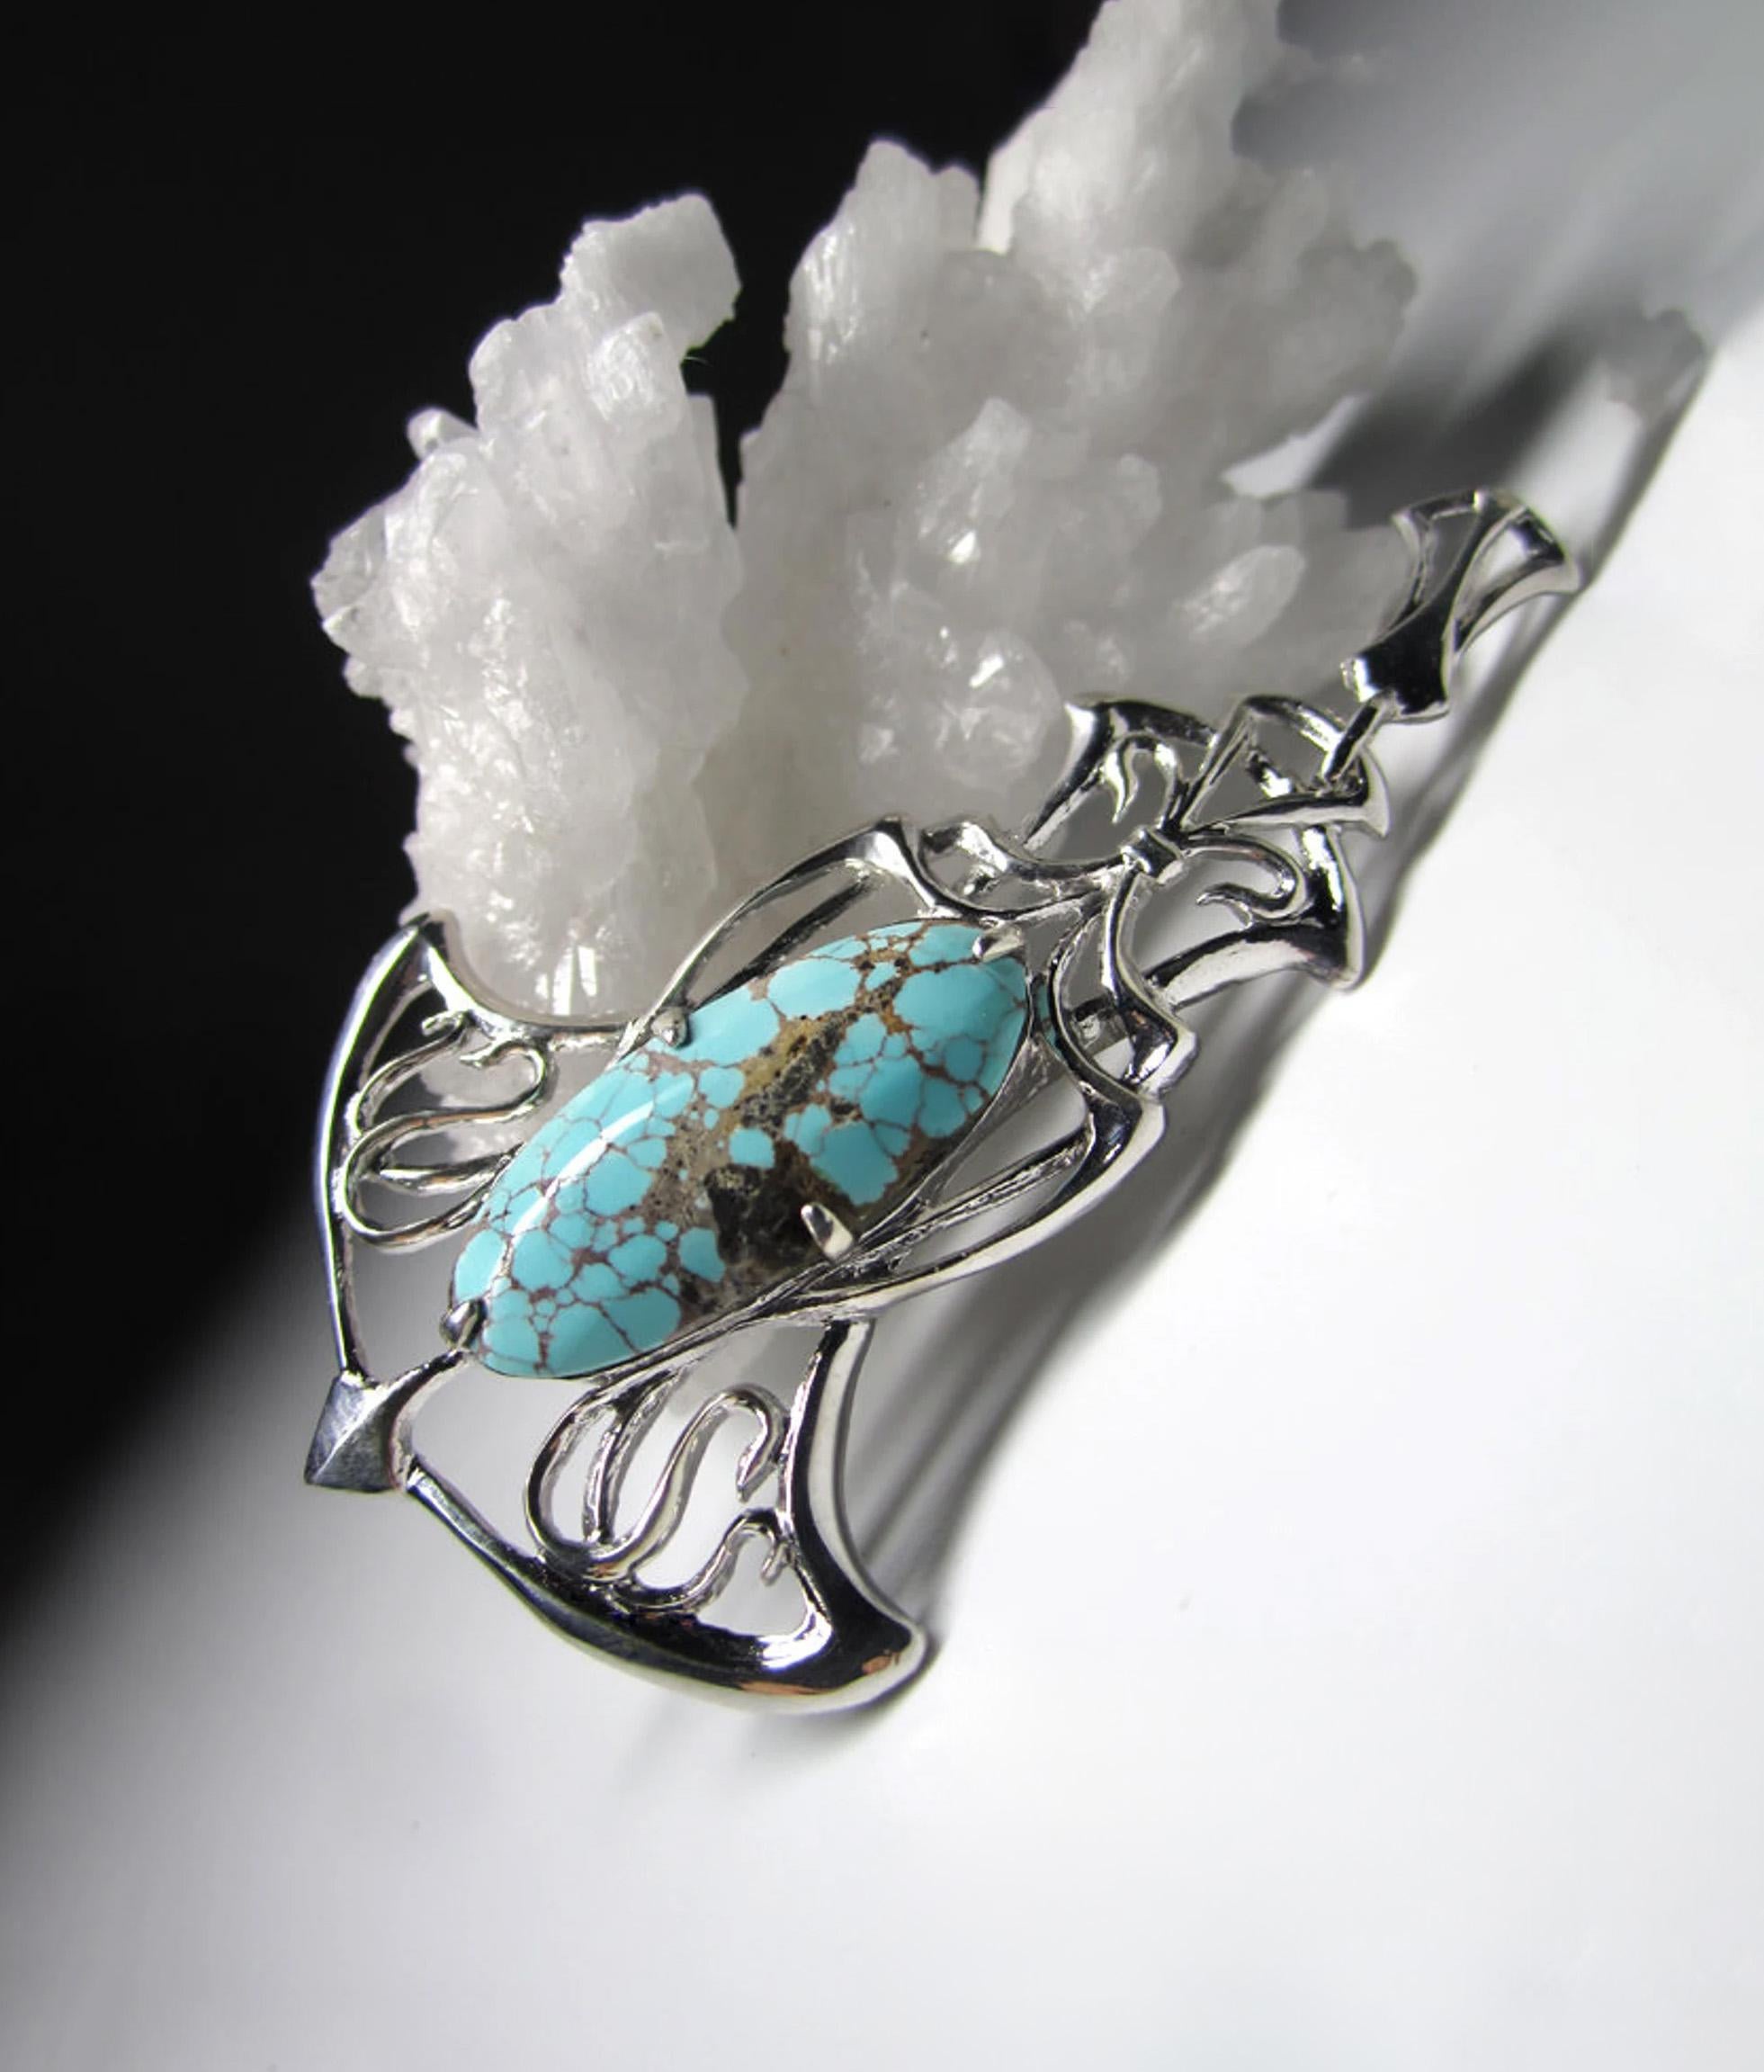 An Art Nouveau style silver pendant with natural Turquoise
turquoise origin - Nishapur
pendant weight - 5.42 grams
pendant height - 2.32 in / 59 mm
gemstone measurements - 0.2 x 0.35 x 0.87 in / 5 х 9 х 22 mm